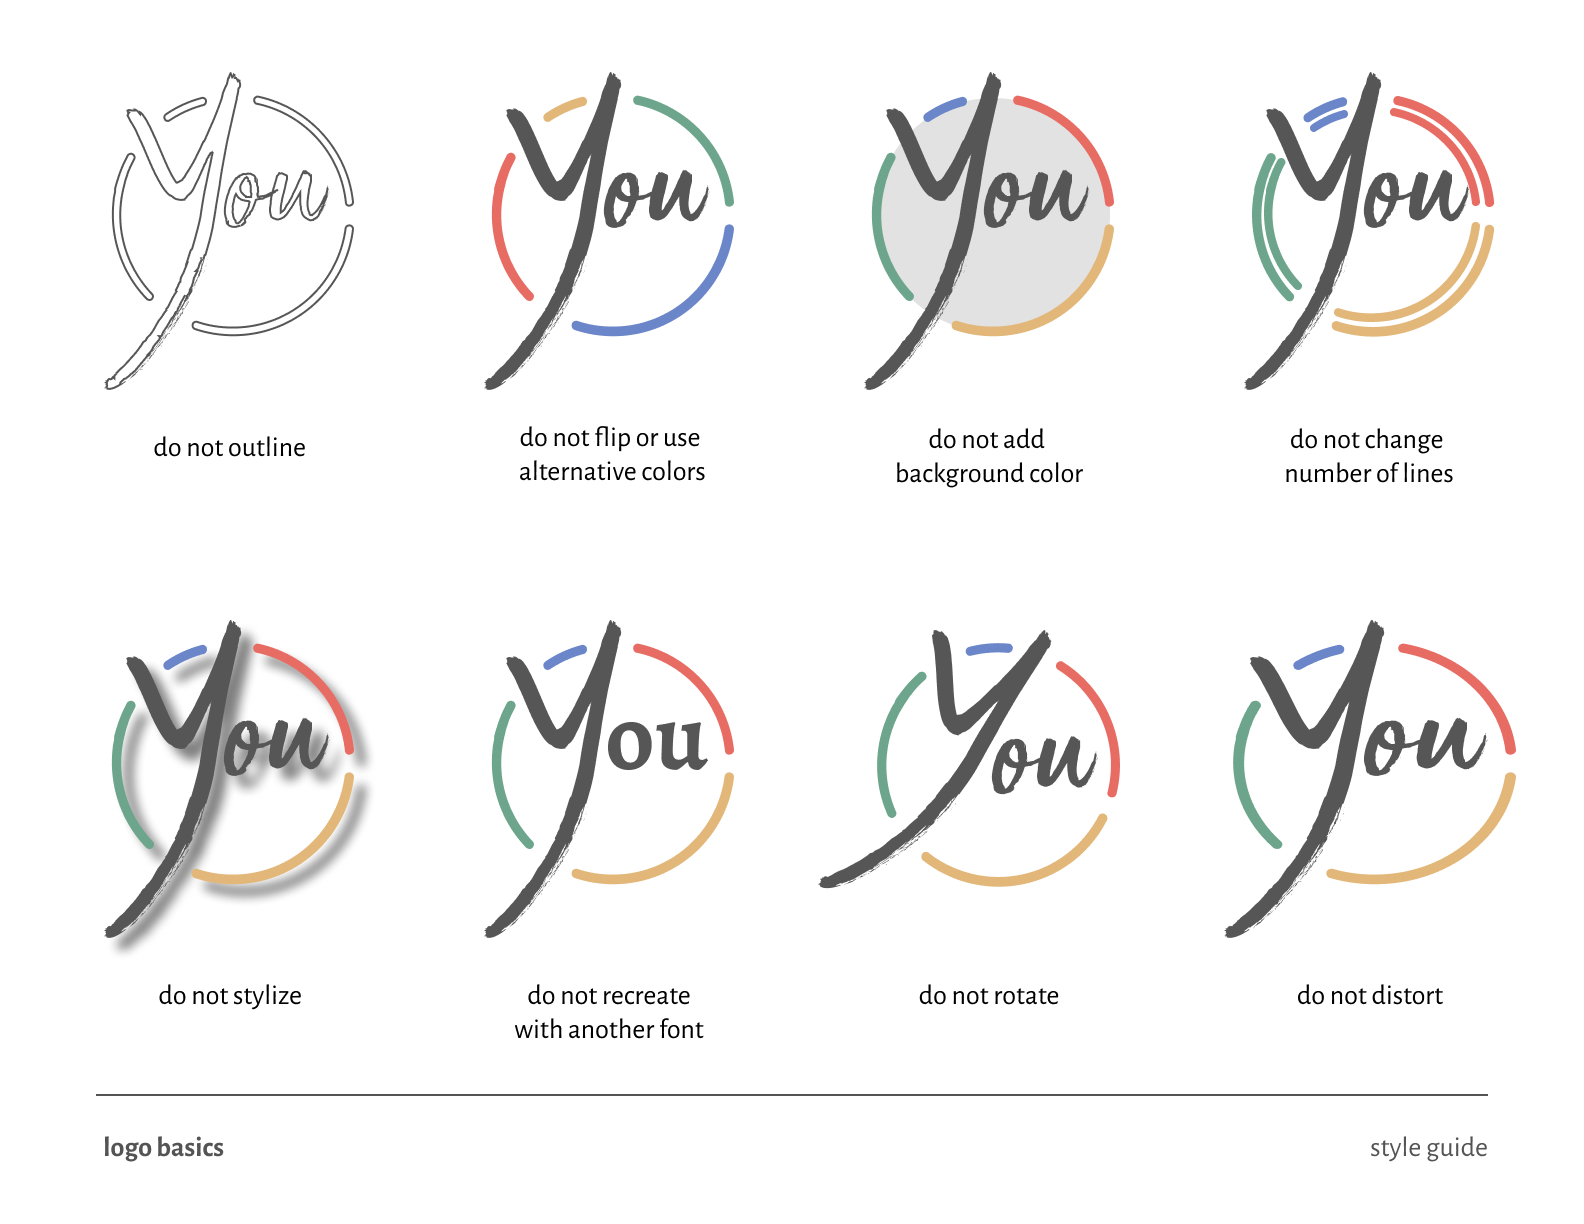 second logo page of you in review's style guide